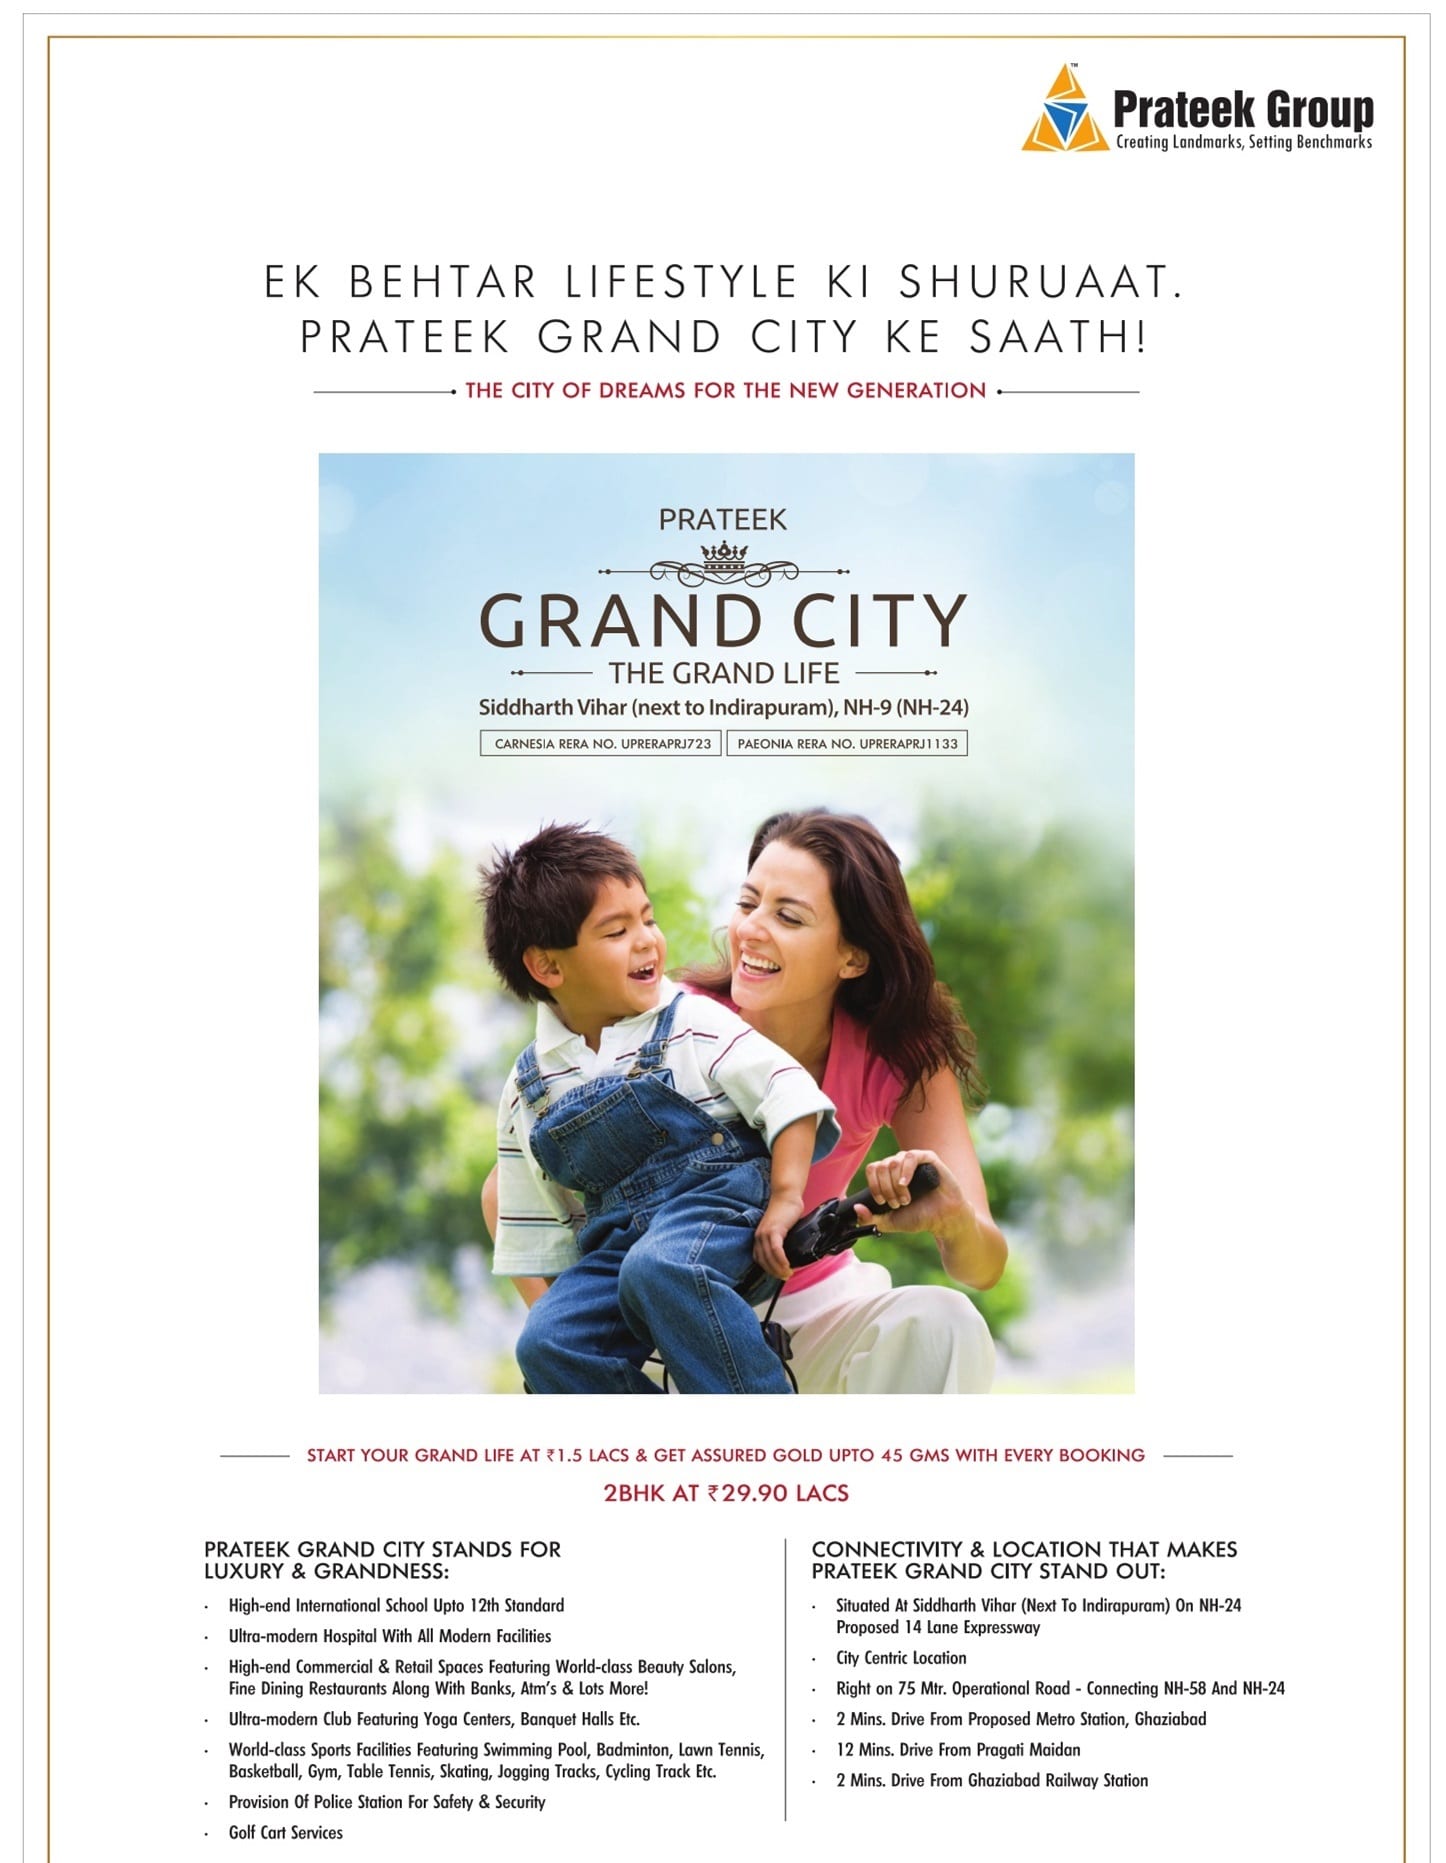 Prateek Grand City - The city of dreams for the new generation in Ghaziabad Update